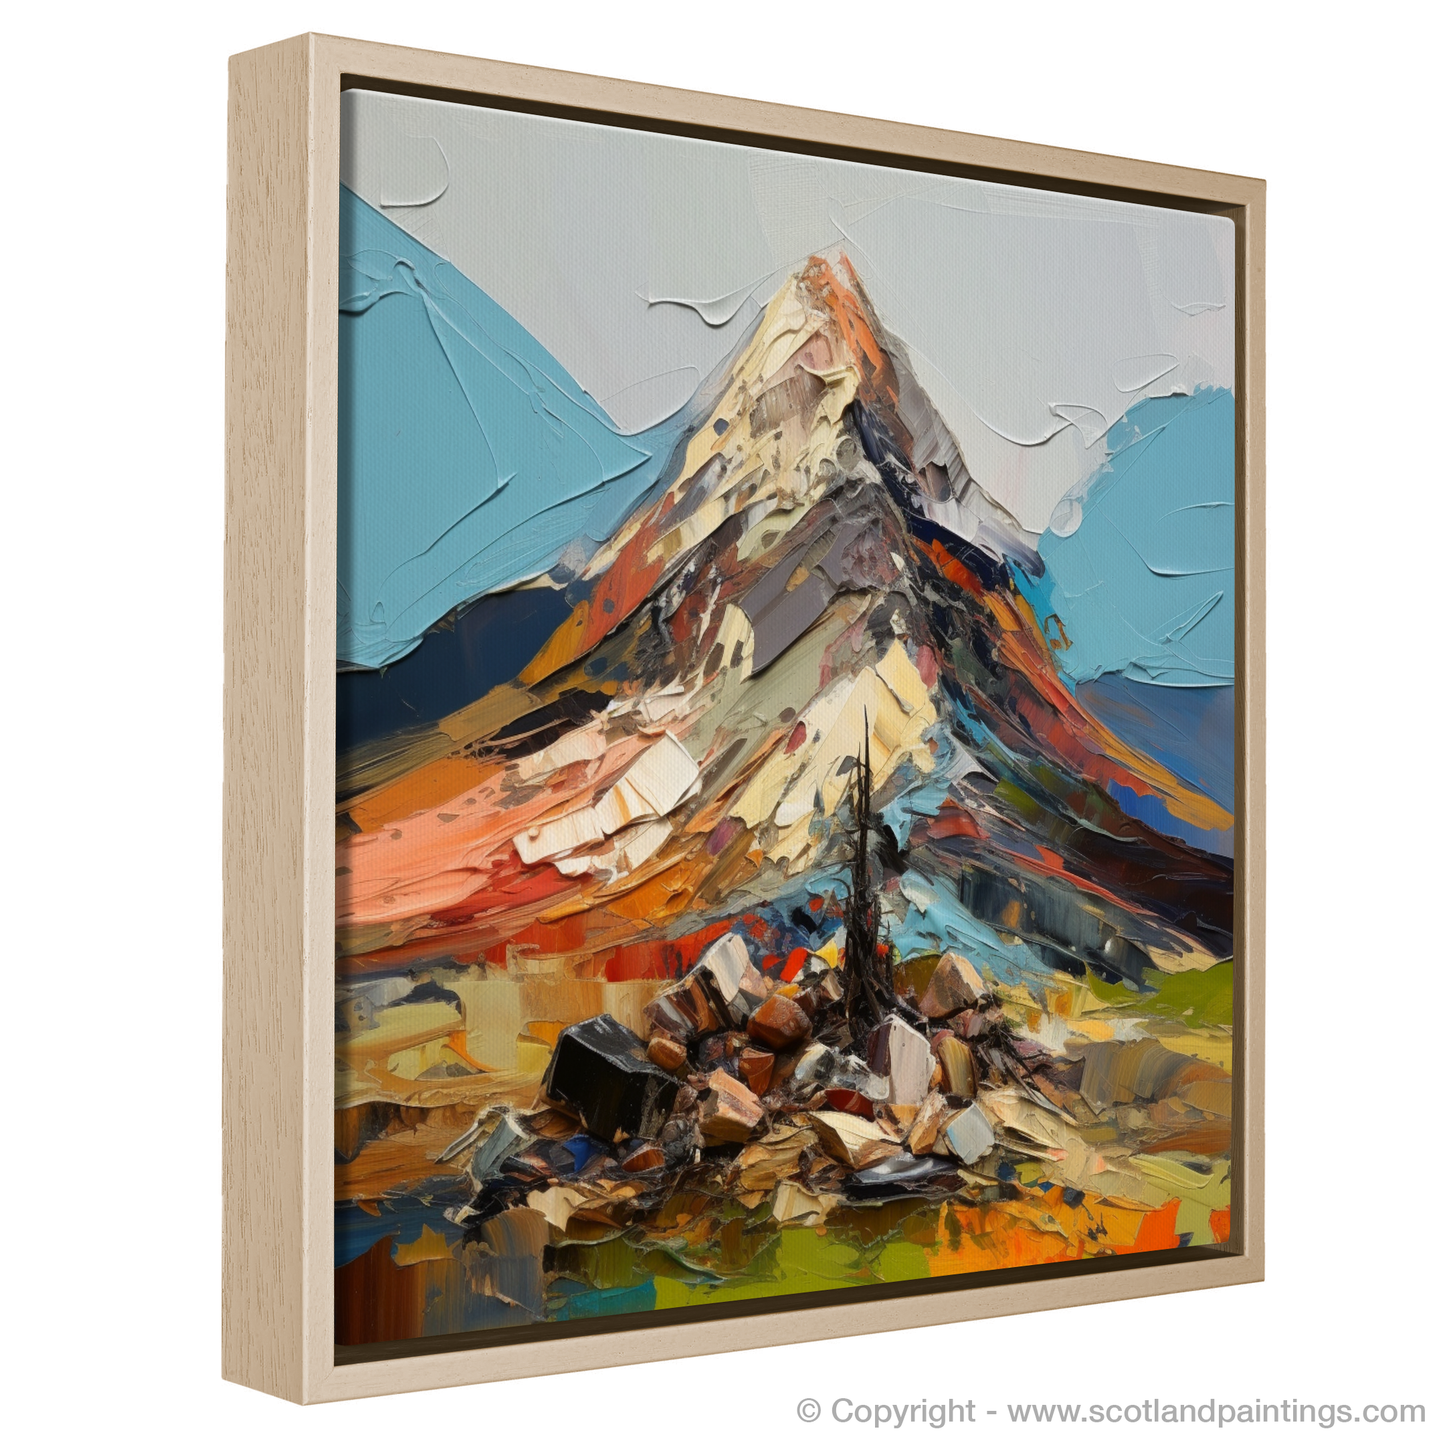 Painting and Art Print of Cairn Gorm, Highlands entitled "Cairn Gorm Unleashed: An Expressionist Ode to the Highland Majesty".